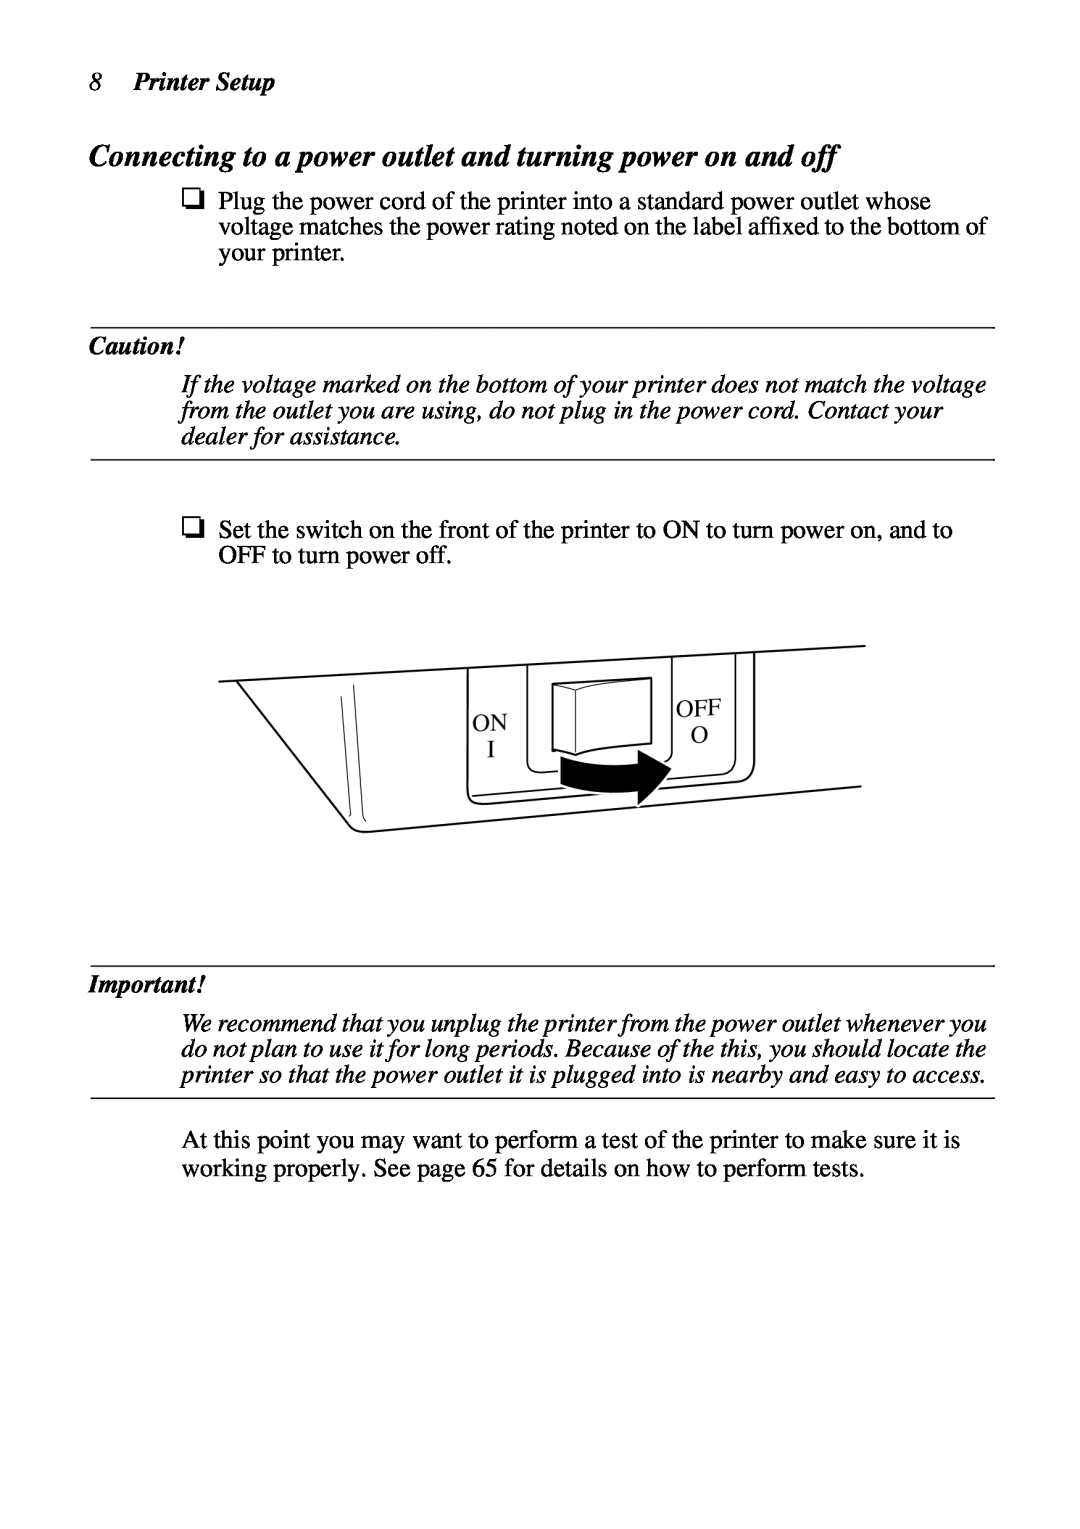 Star Micronics LC-7211 user manual Connecting to a power outlet and turning power on and off, Printer Setup 